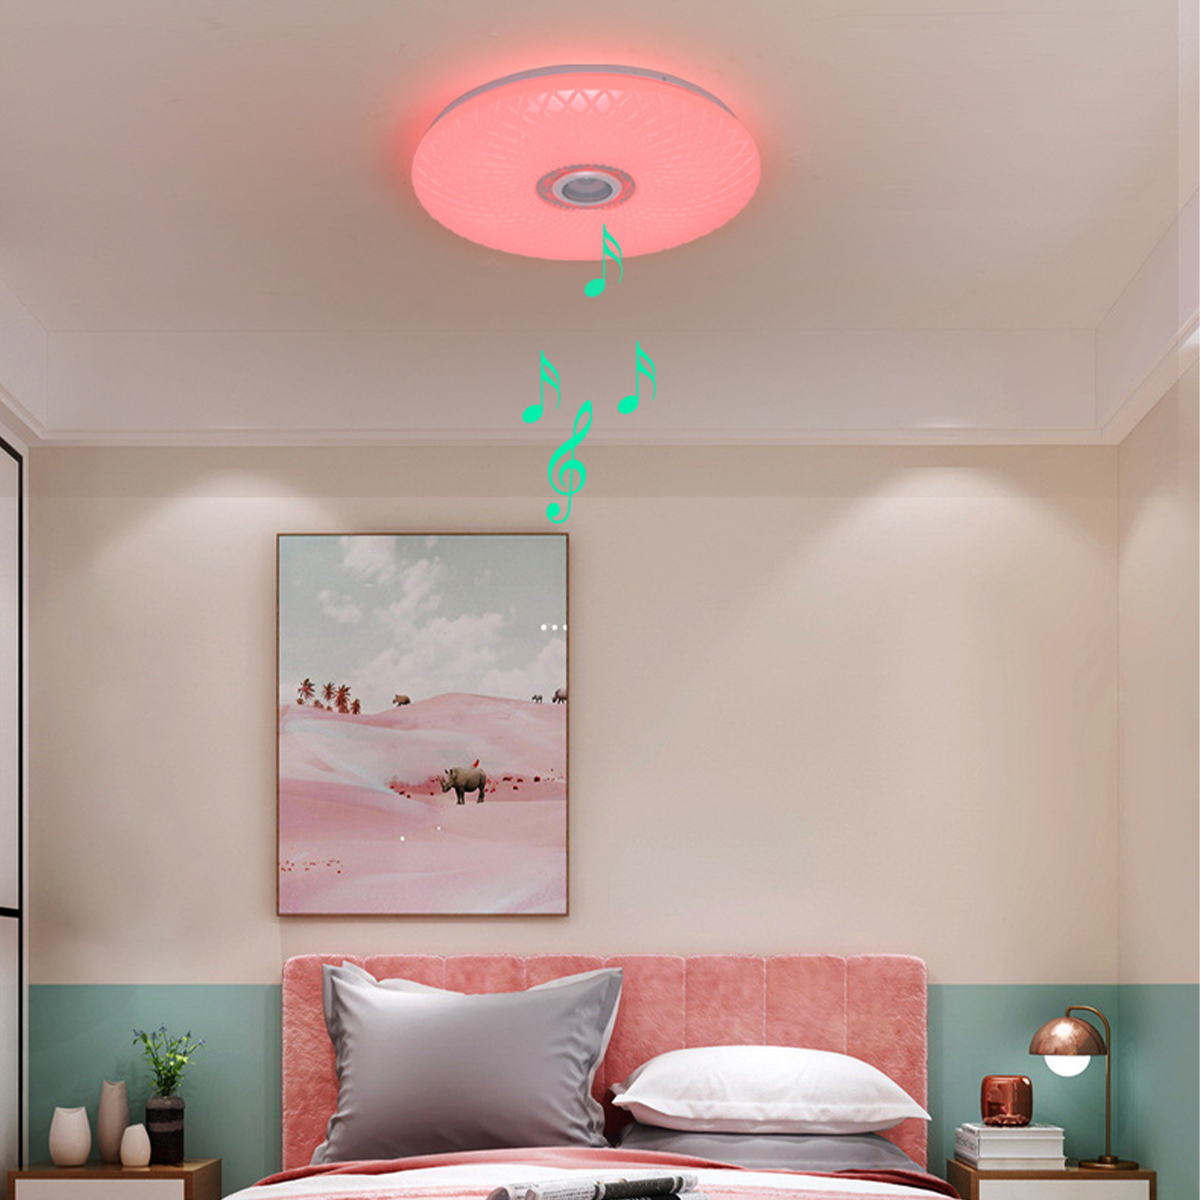 60W-Smart-LED-Ceiling-Light-RGB-bluetooth-Music-Speaker-Dimmable-Lamp-APP-Remote-1602921-10